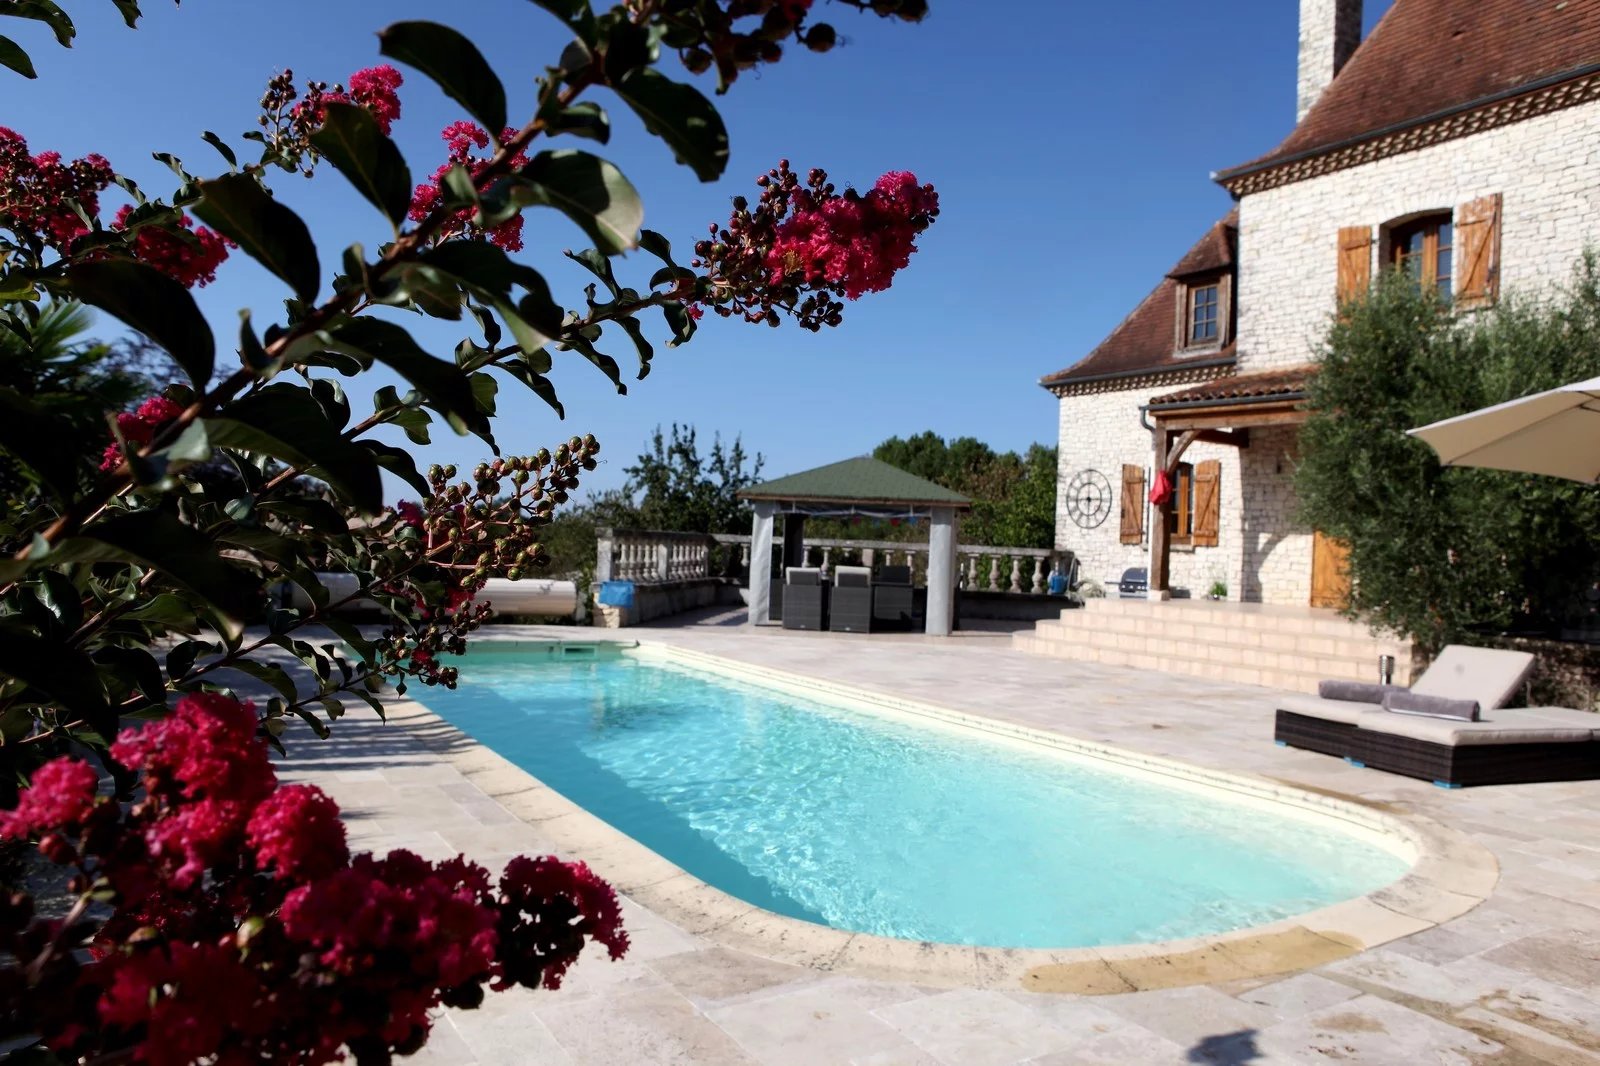 6-Bedroom Stone Property with Pool and Self Contained Apt - Belves Dordogne